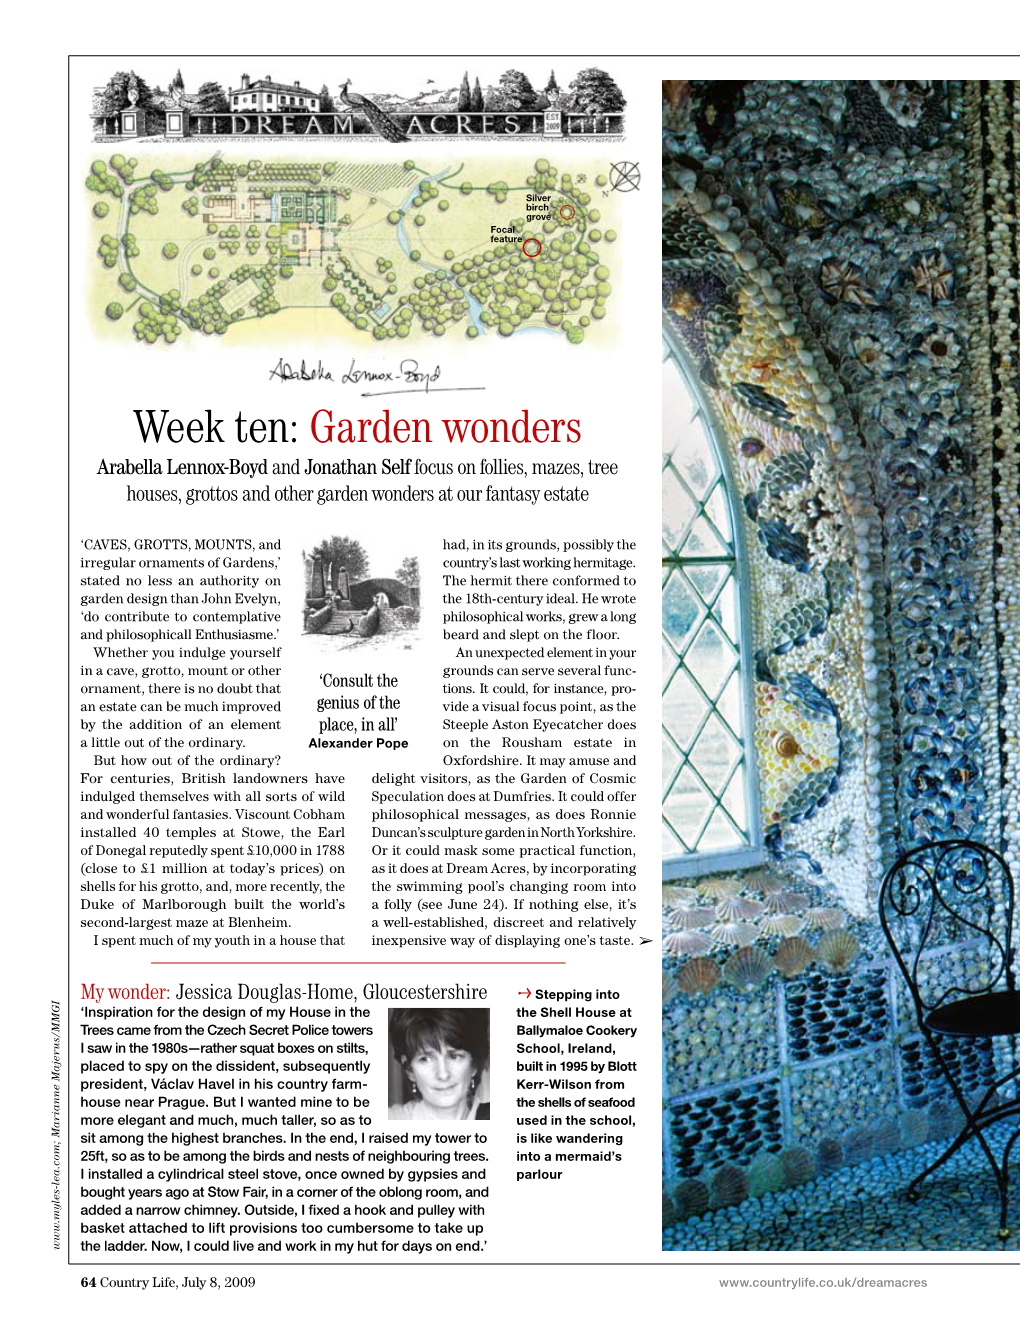 Week Ten: Garden Wonders Arabella Lennox-Boyd and Jonathan Self Focus on Follies, Mazes, Tree Houses, Grottos and Other Garden Wonders at Our Fantasy Estate